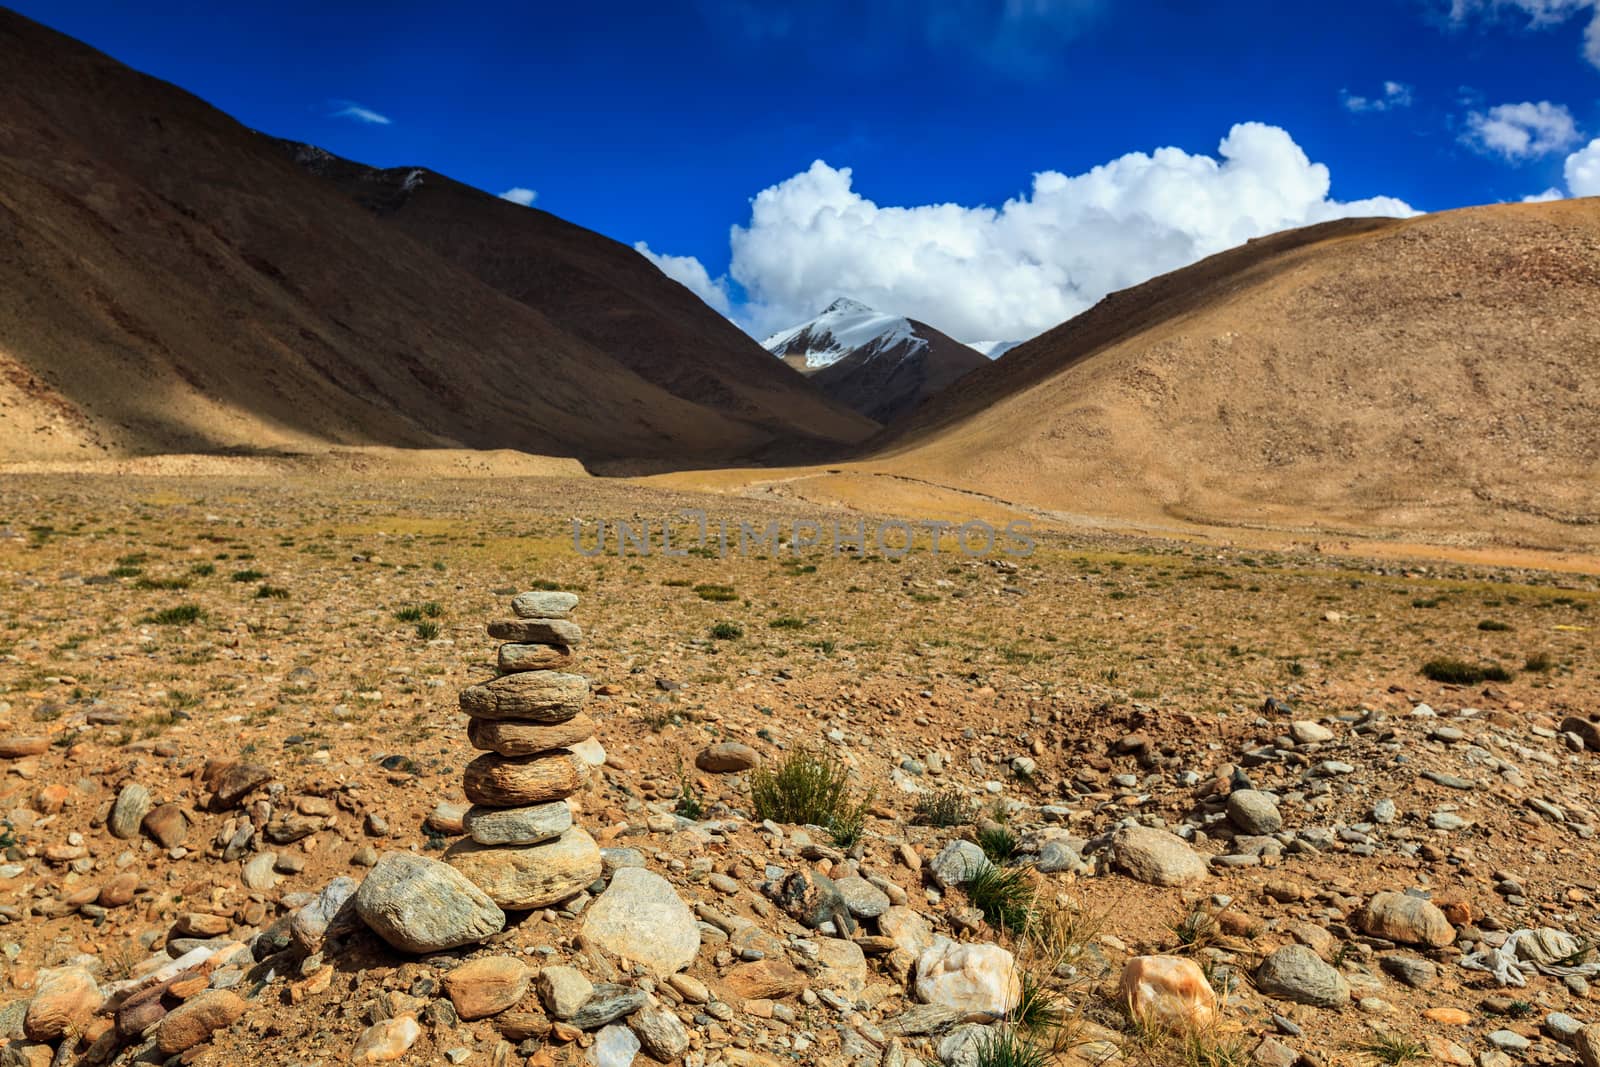 Stone cairn in Himalayas by dimol